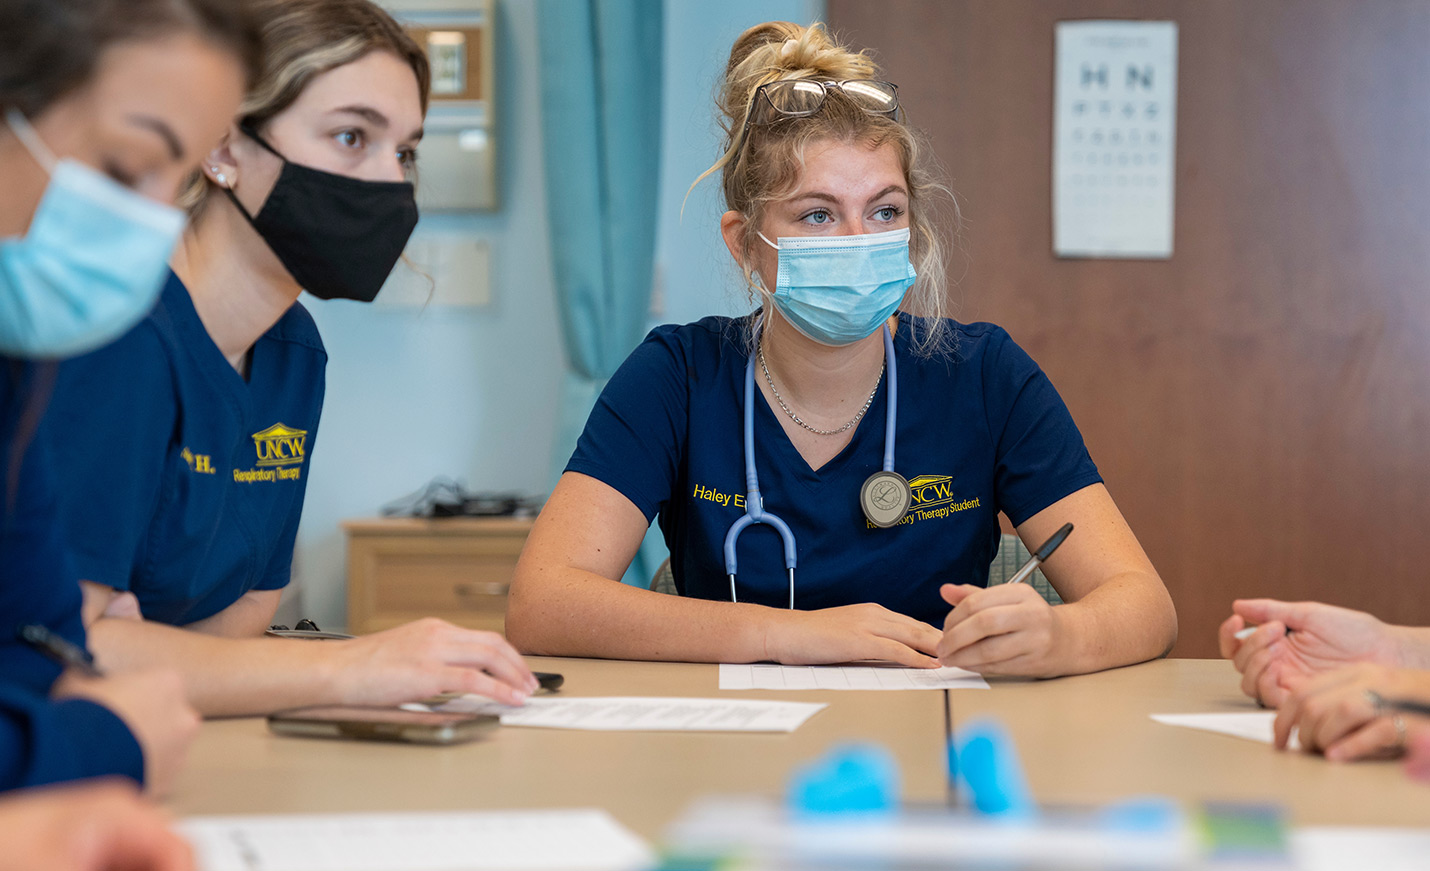 Respiratory therapy students sit together taking notes.